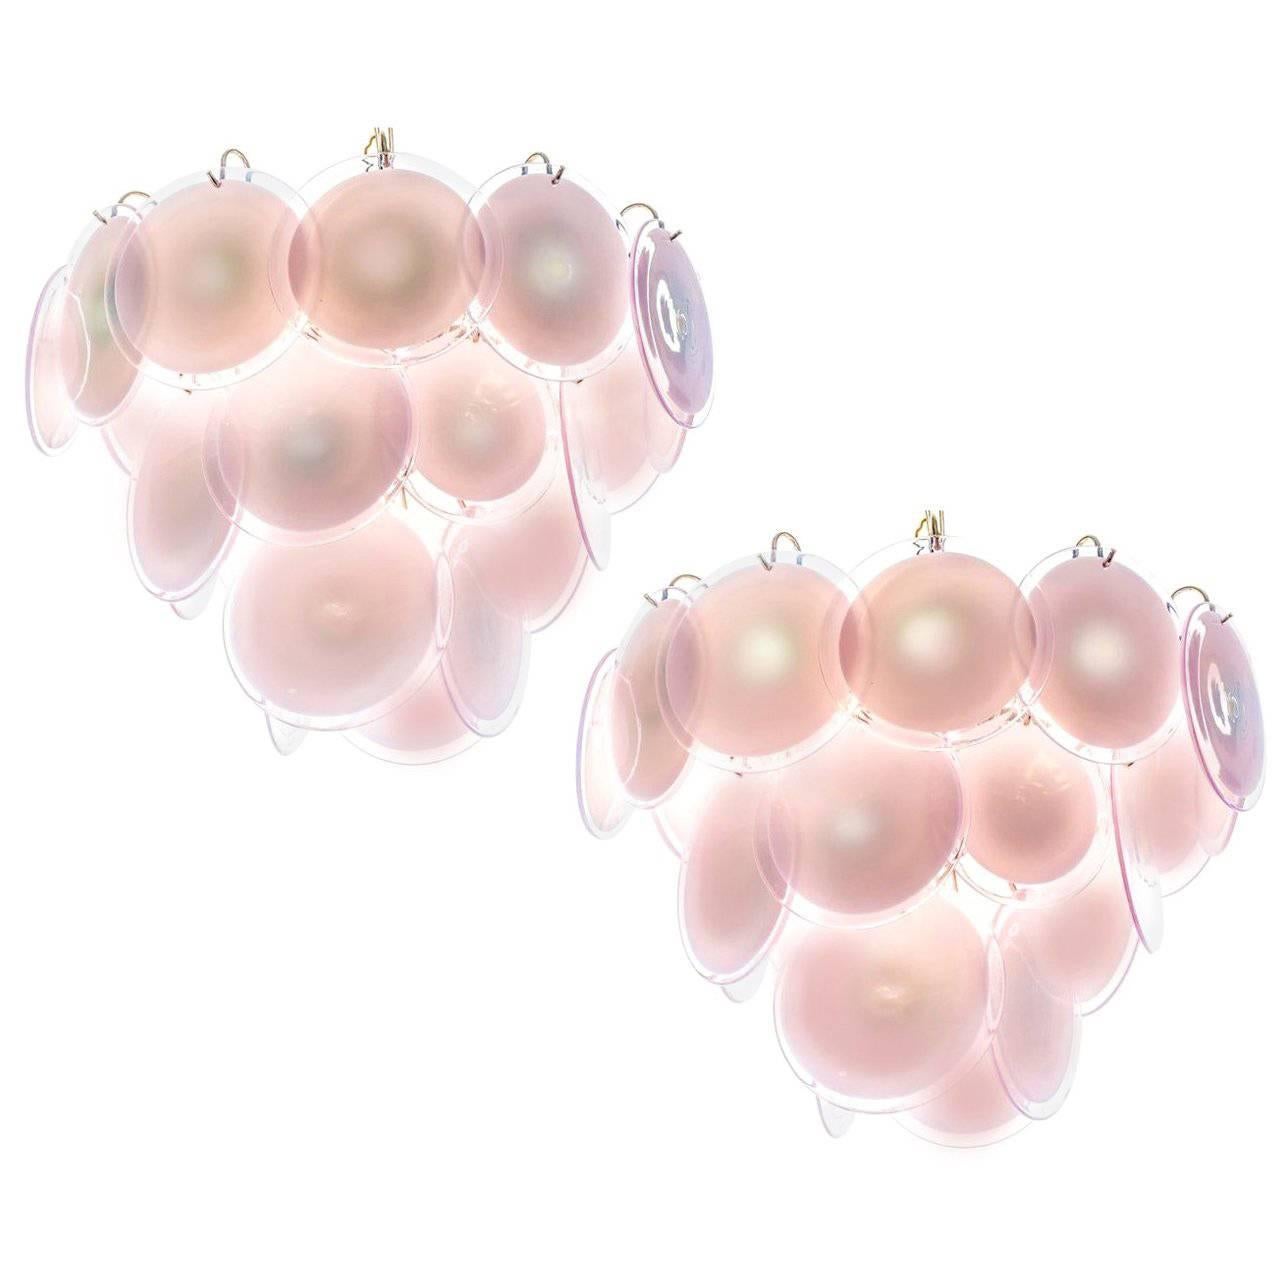 Spectacular pair of chandeliers by Vistosi made in Murano. Each chandelier is formed by 23 pink discs of precious Murano glass are arranged on floor levels. Nine-light. Measures: Height without chain 50 cm. Available also with white discs.
  